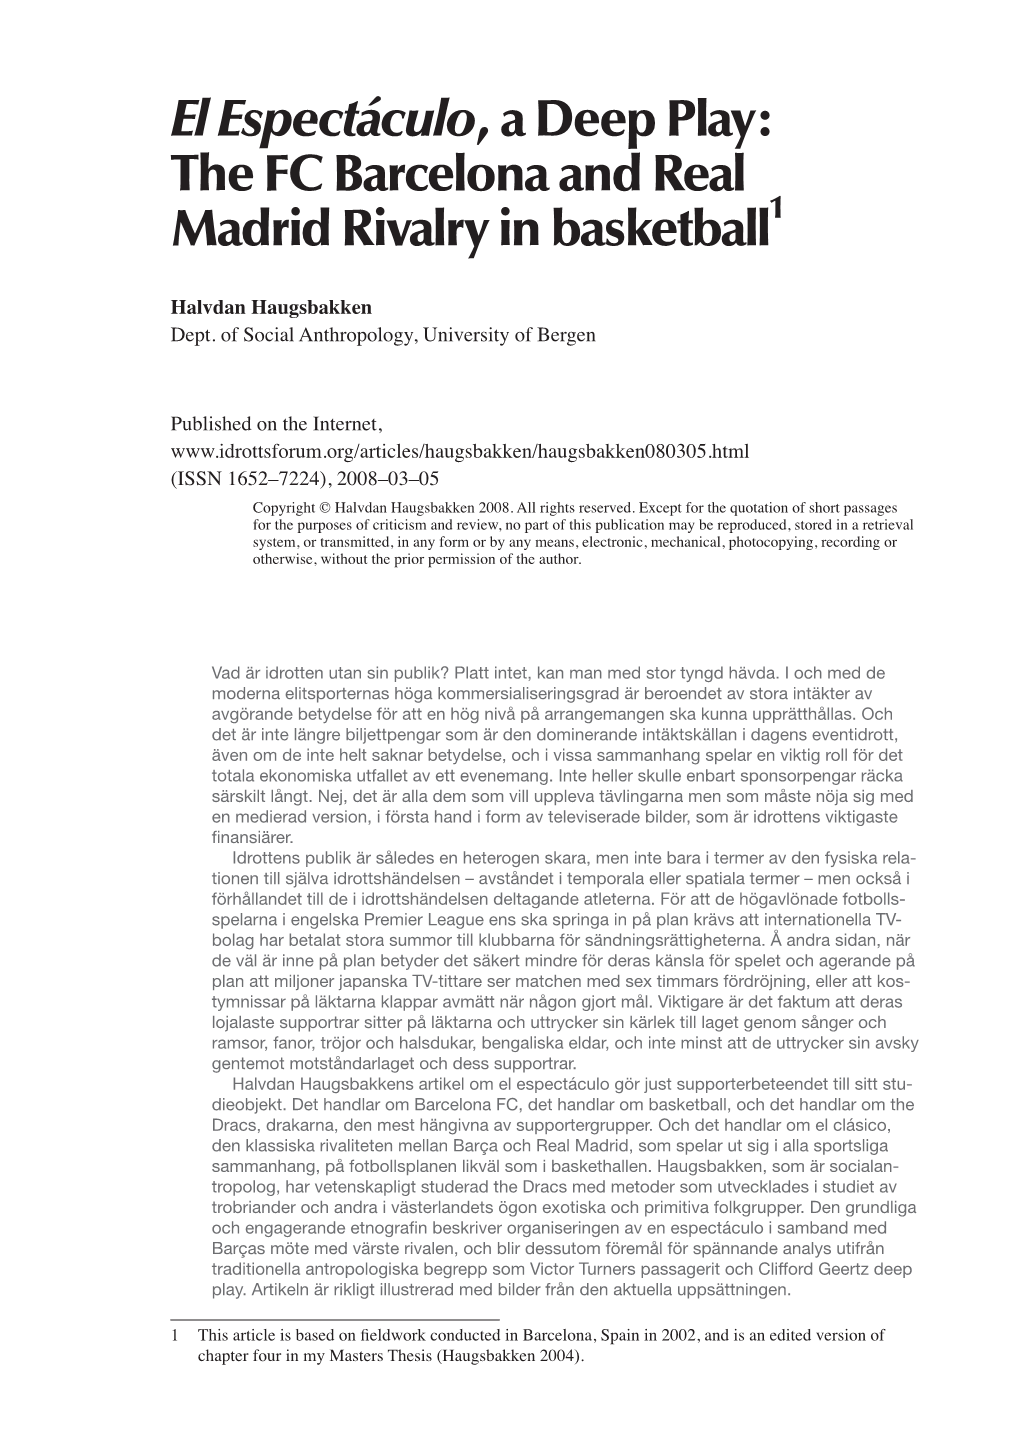 The FC Barcelona and Real Madrid Rivalry in Basketball